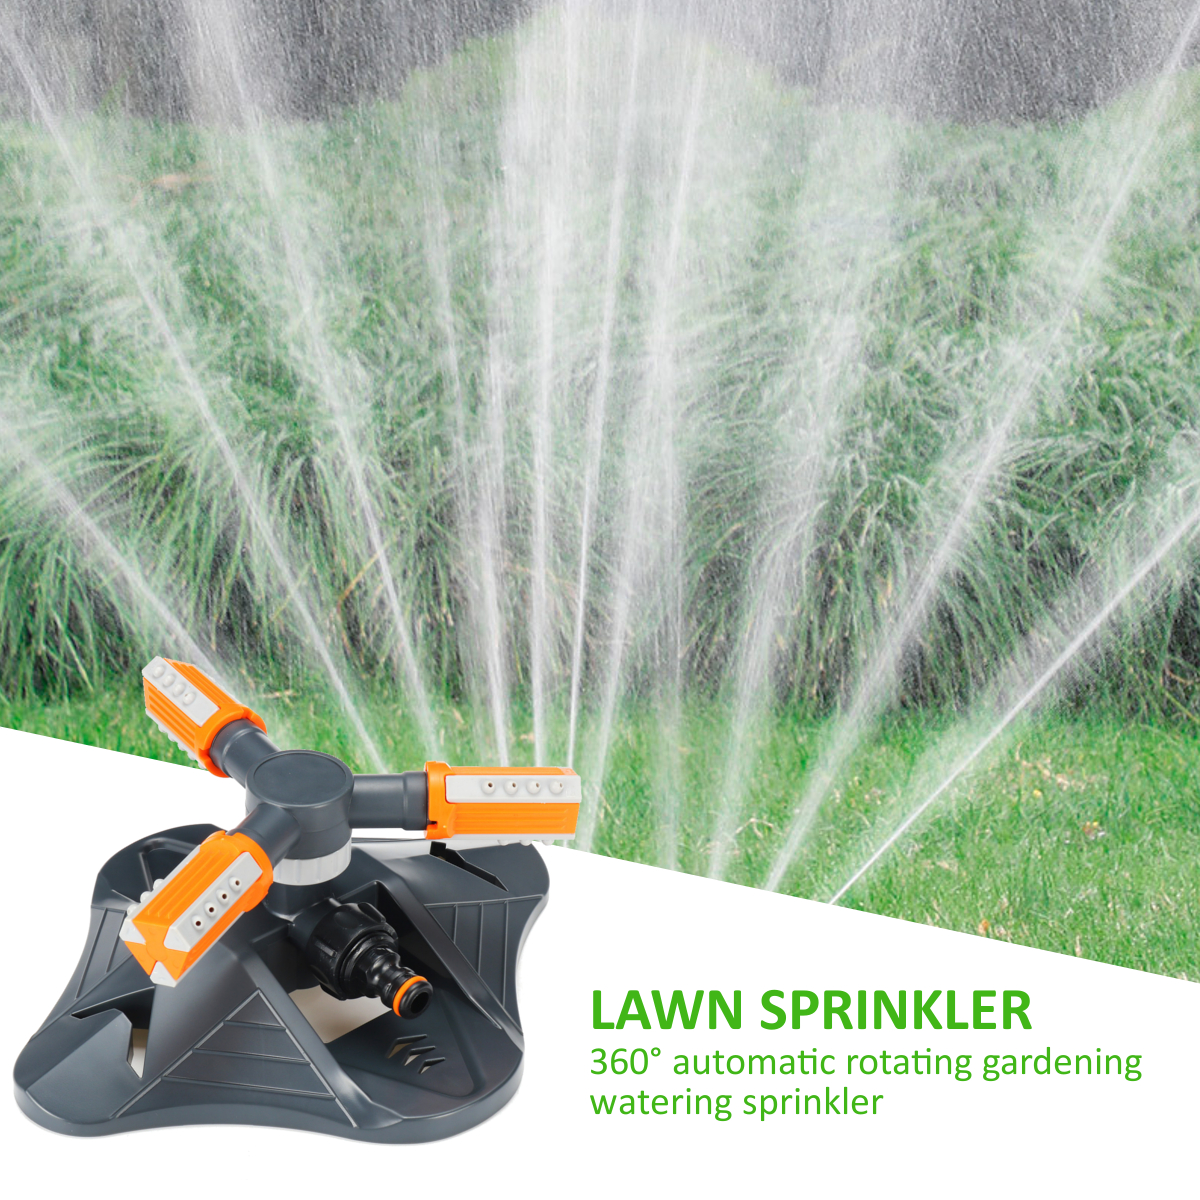 3 Arms Automatic 360° Rotation Lawn Sprinkler Spray Head Garden Irrigation Watering Tool